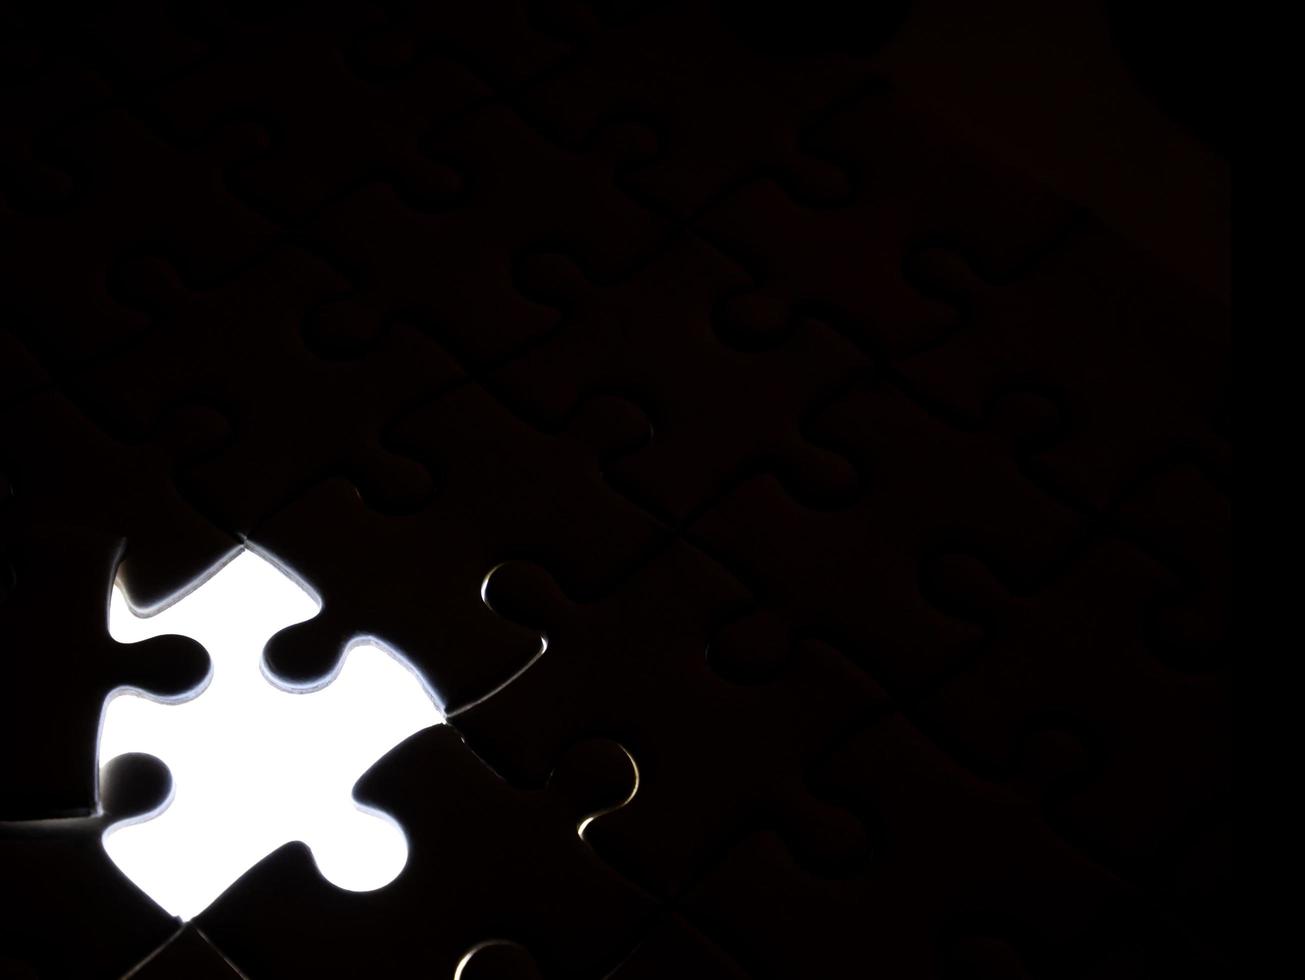 Missing Jigsaw puzzle piece, business concept for completing the finishing puzzle piece photo